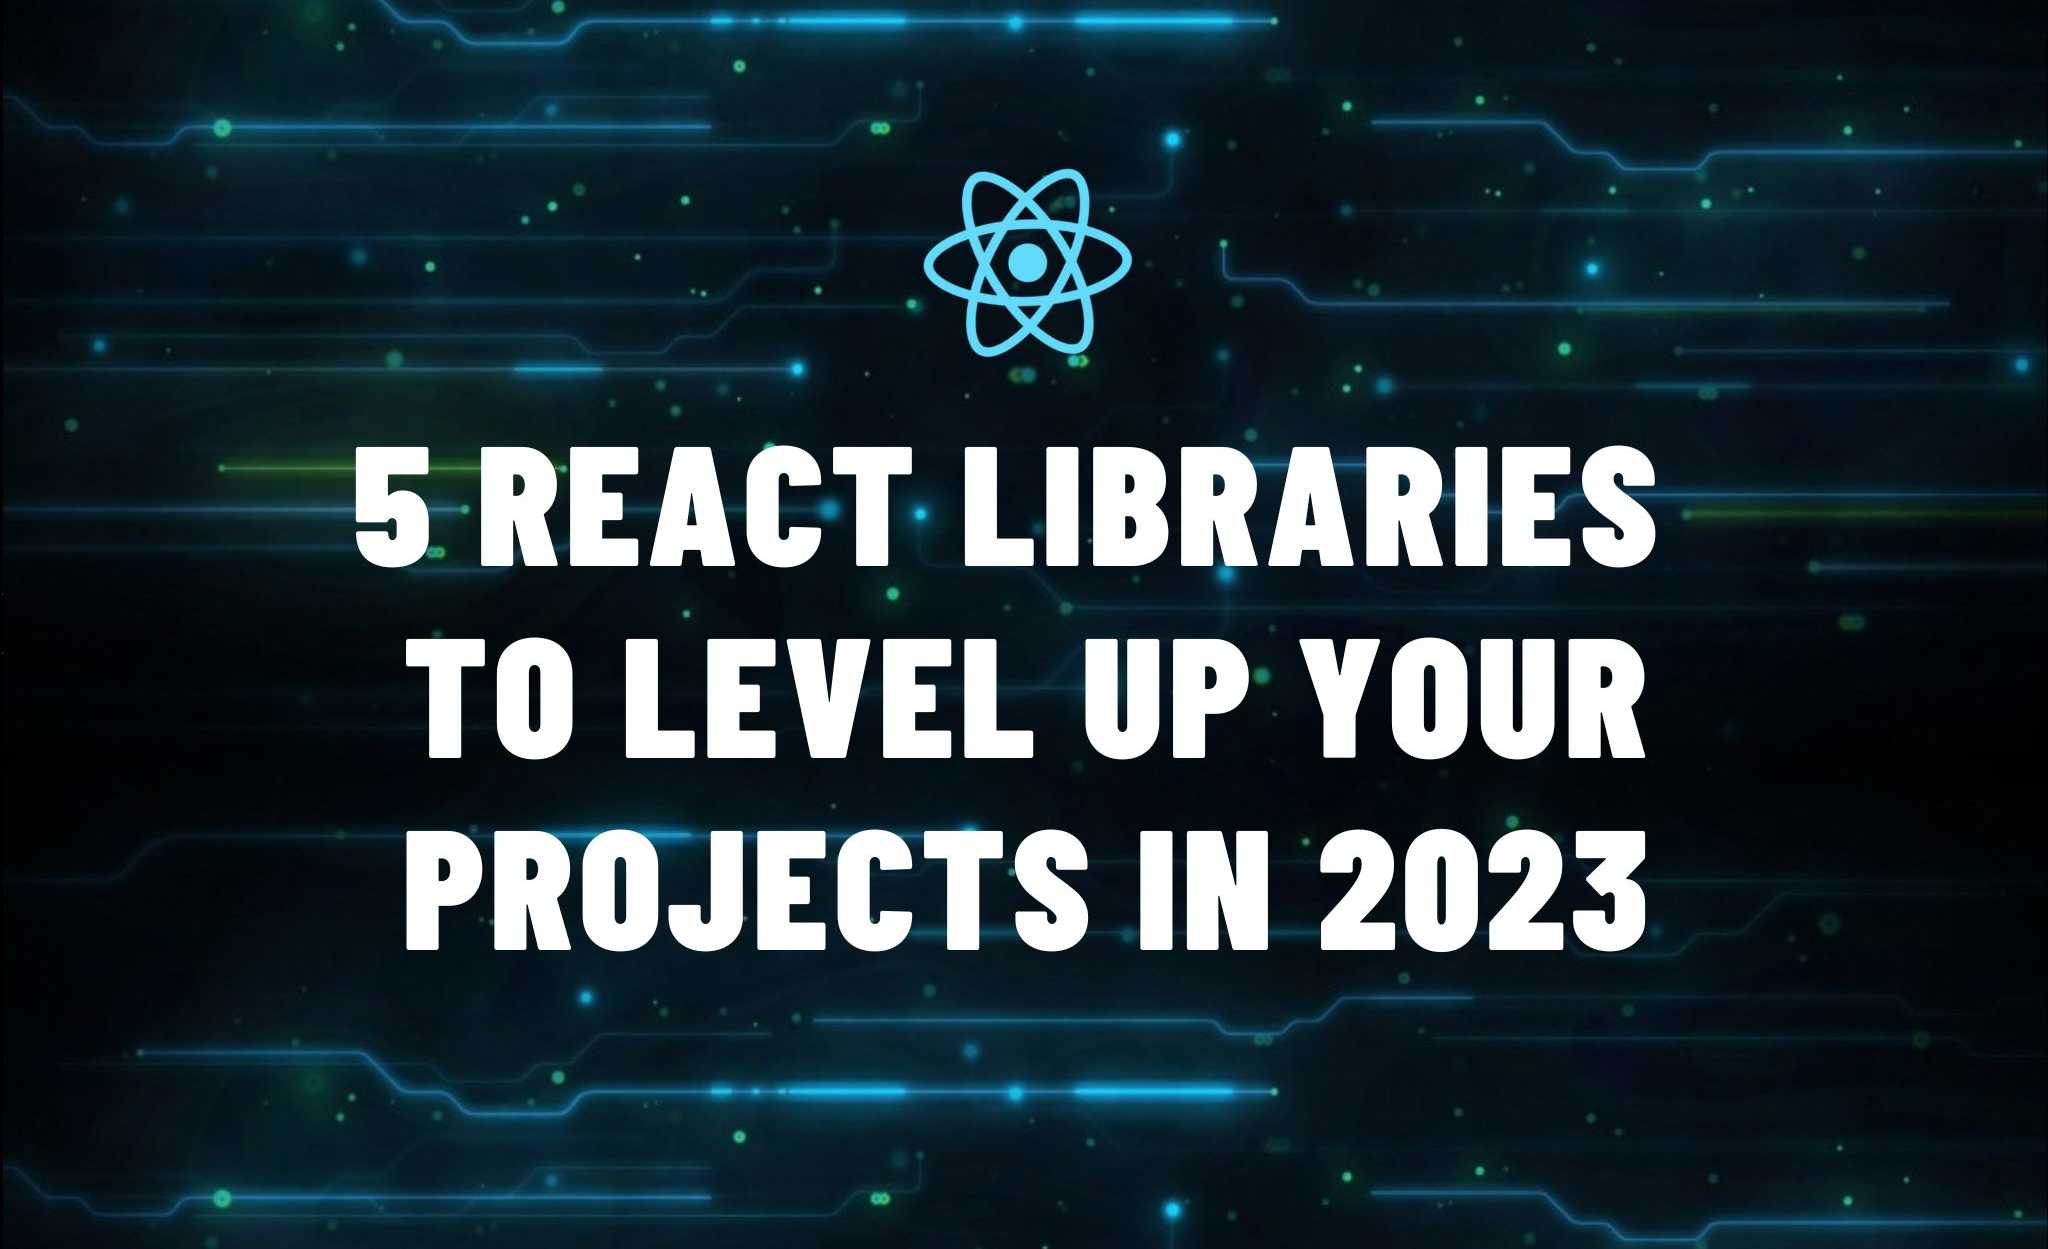 5 React Libraries to Level Up your Projects in 2023